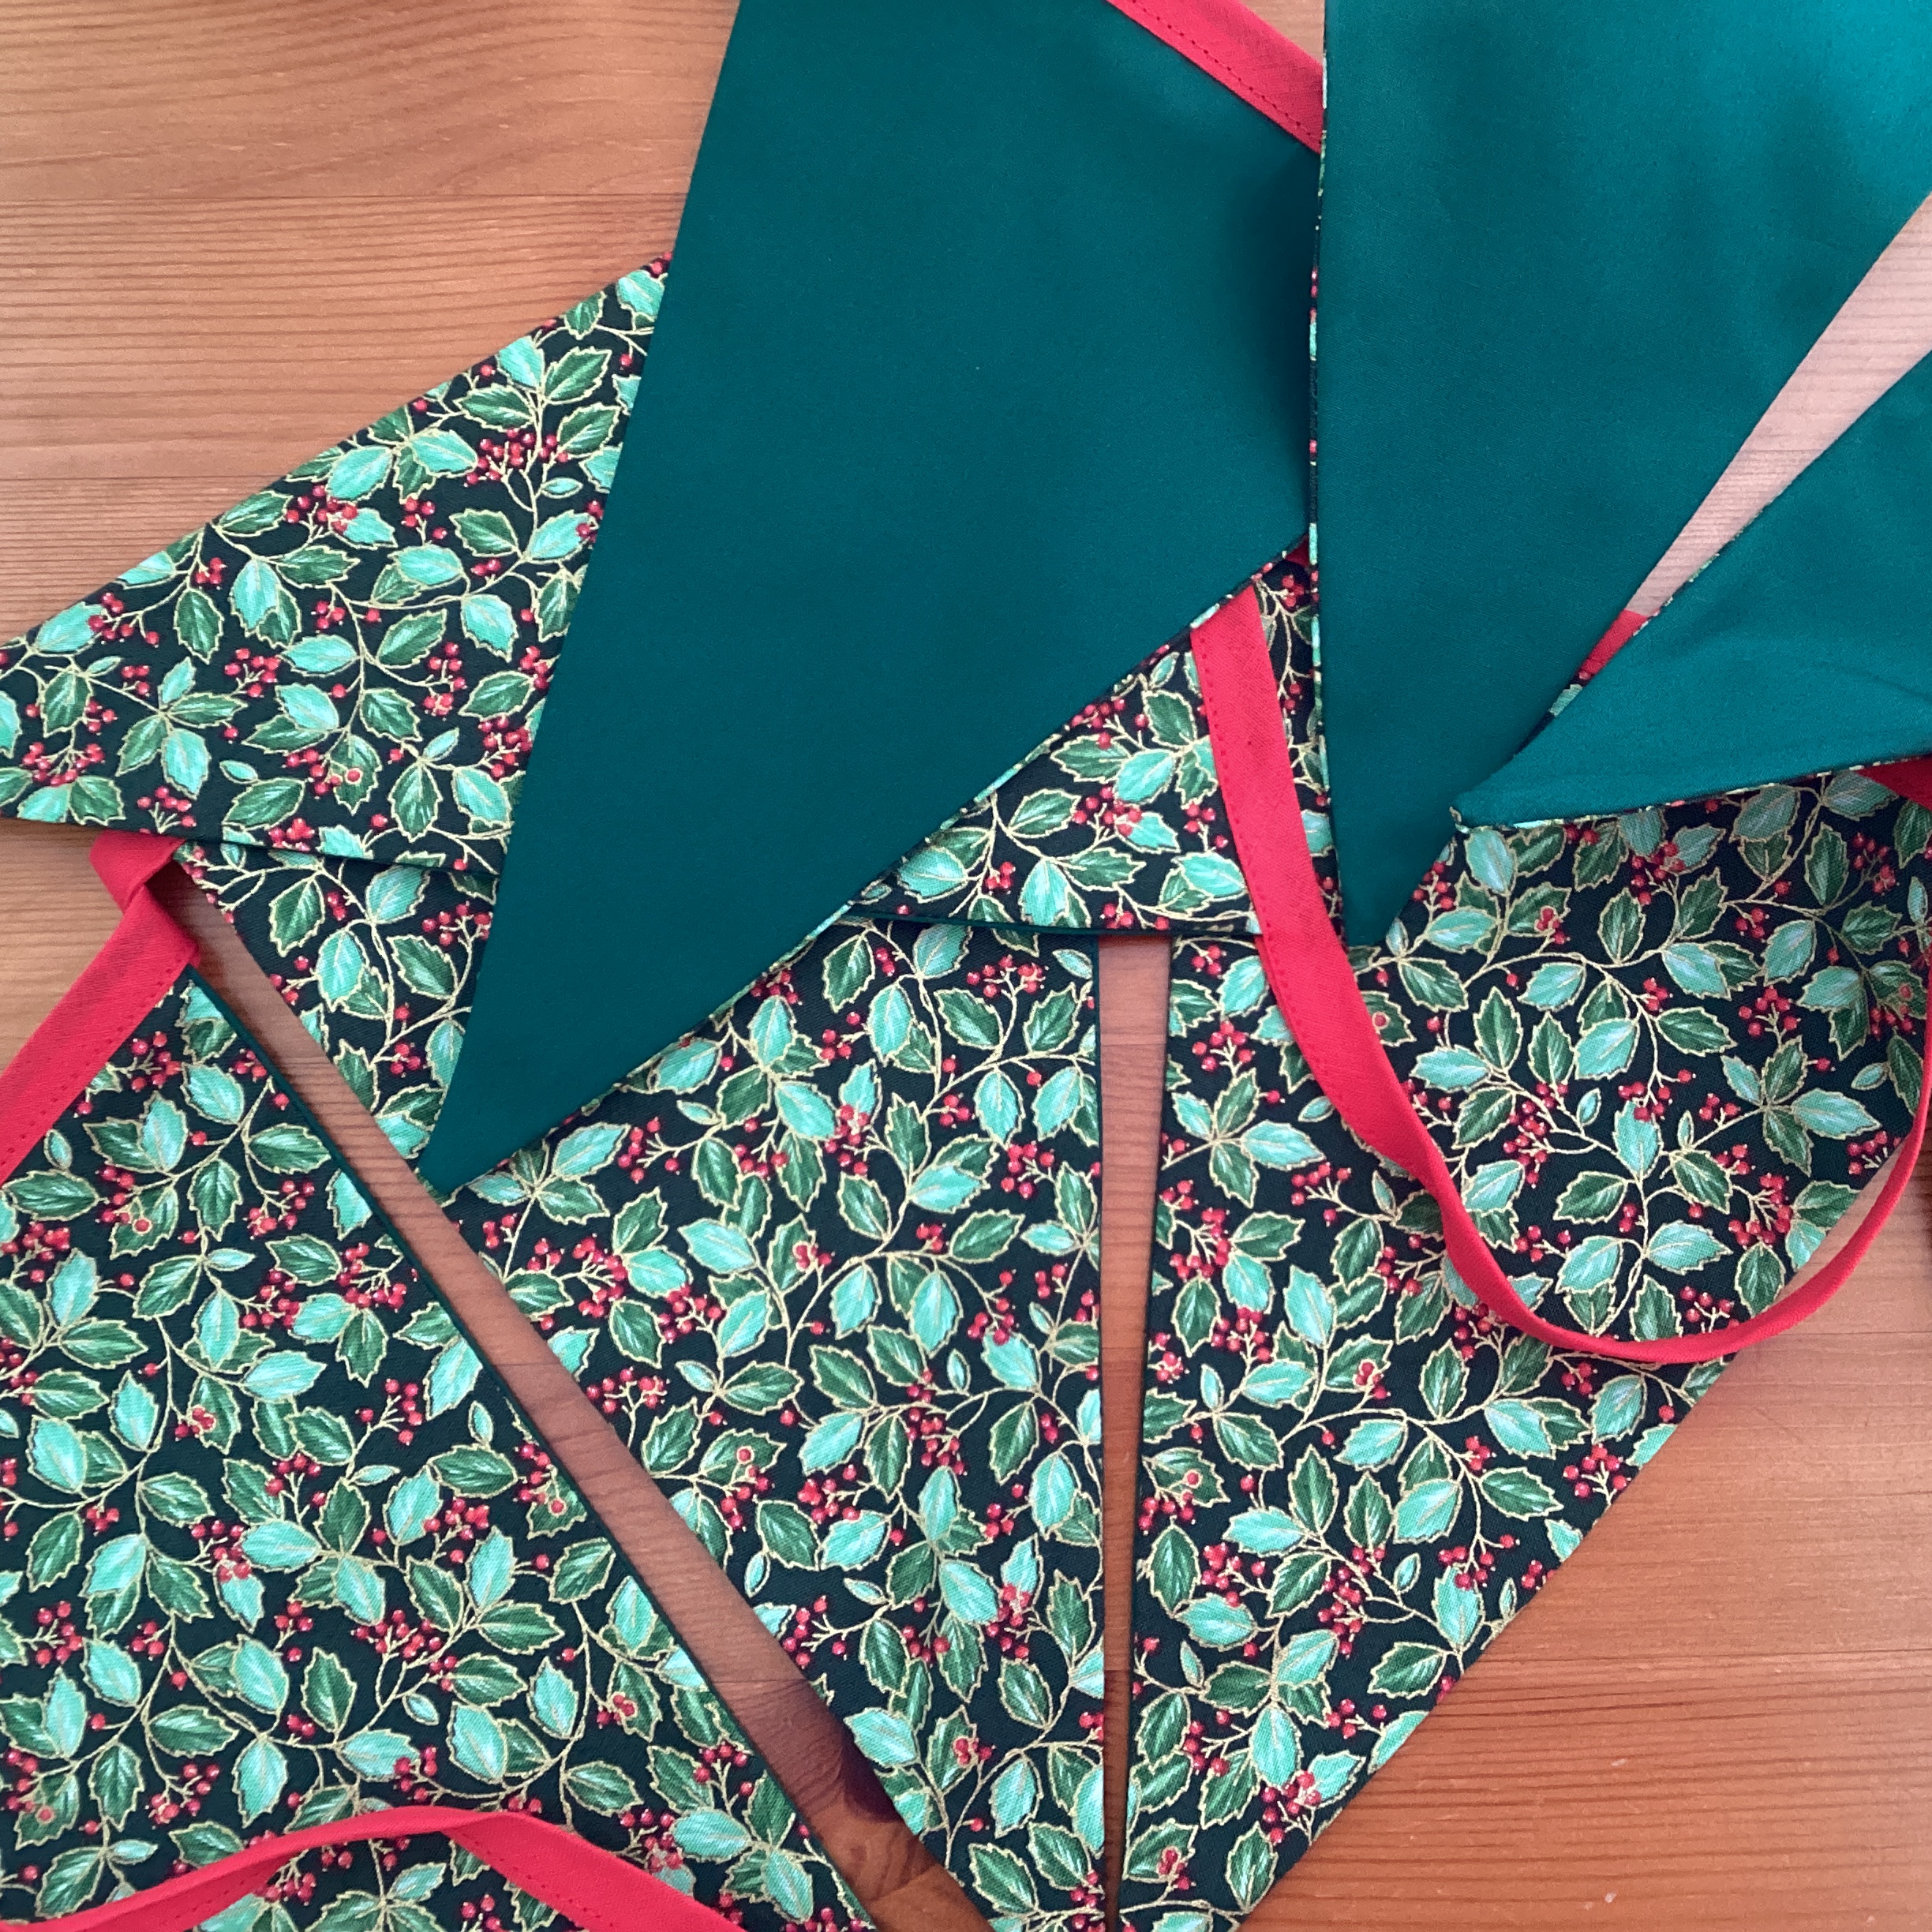 Christmas Bunting - ditsy green holly with red berries